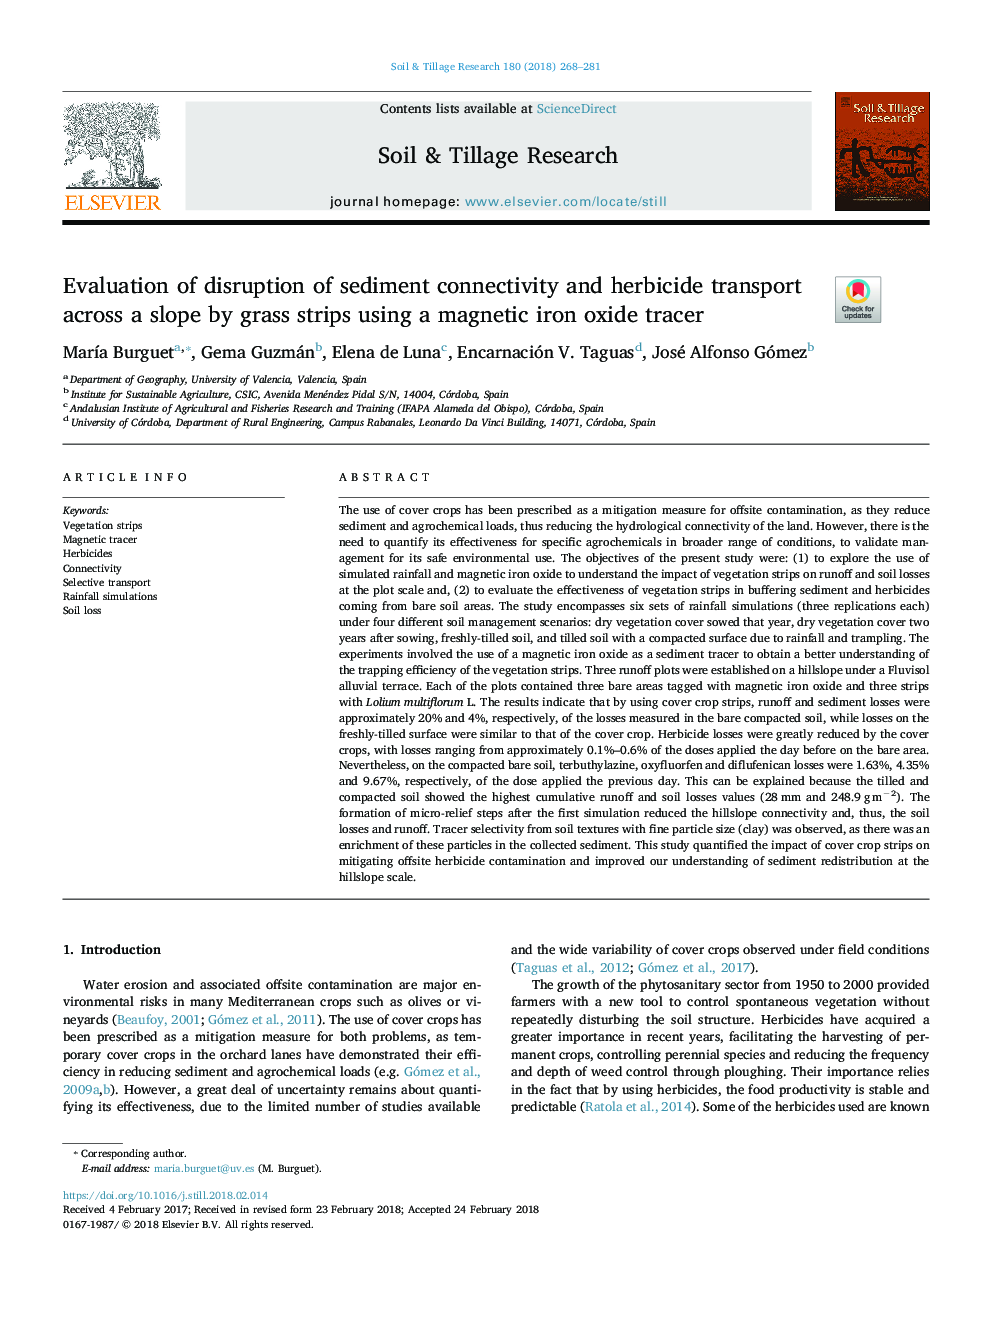 Evaluation of disruption of sediment connectivity and herbicide transport across a slope by grass strips using a magnetic iron oxide tracer